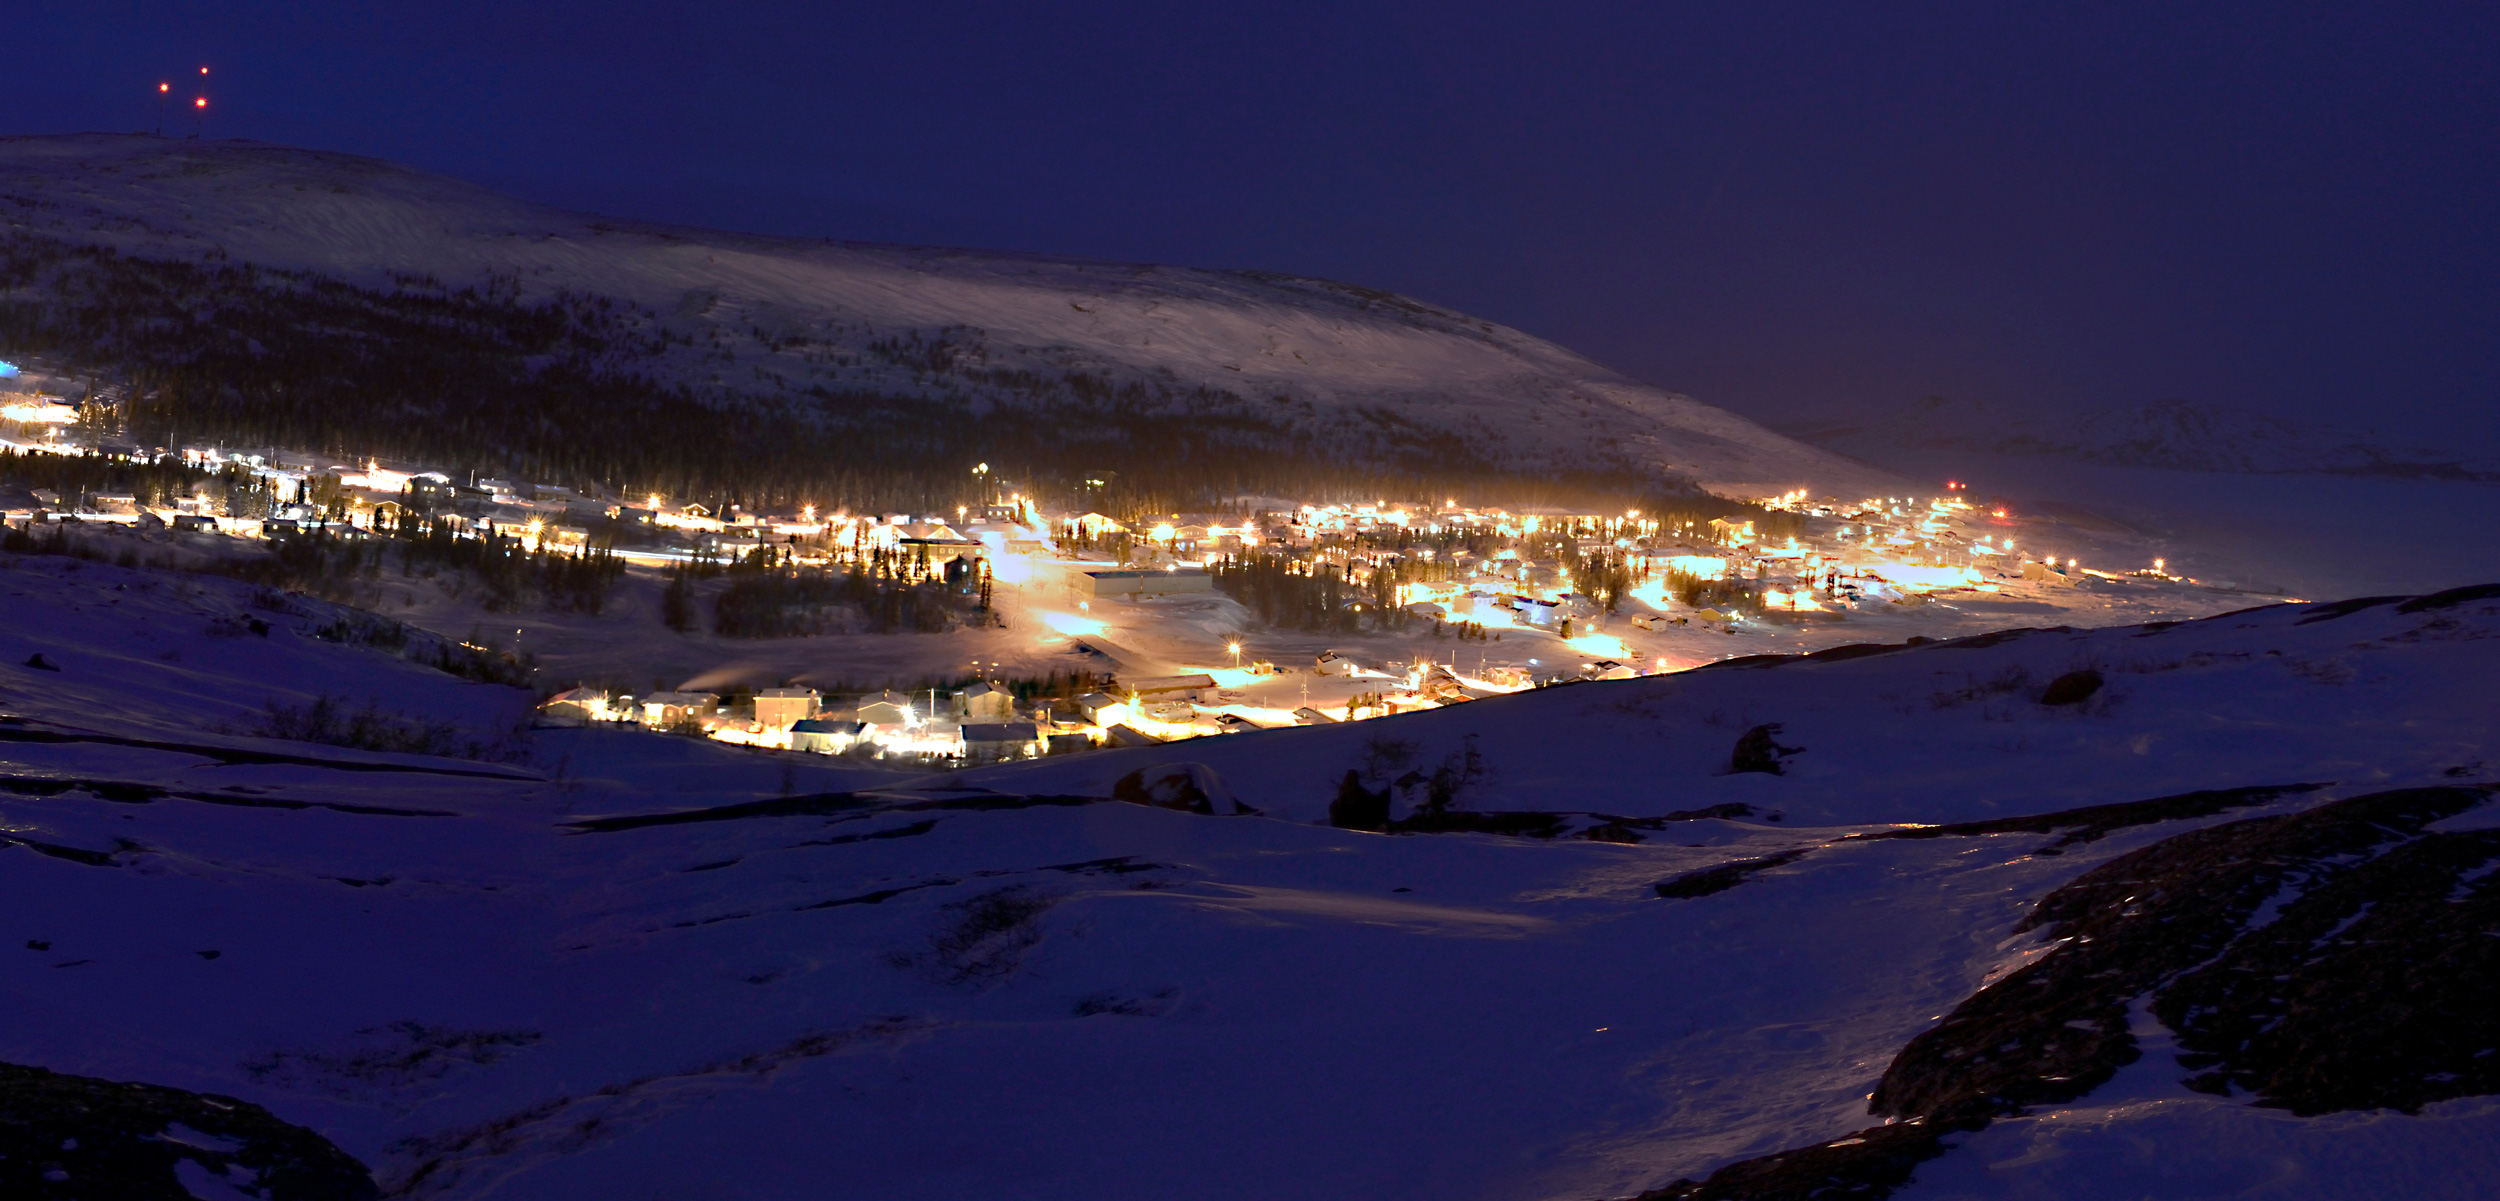 In Nain, a coastal village in Newfoundland and Labrador, the approximately 1,400 residents rely on sea ice for transportation and traditional activities. Photo by Master Corporal Robert LeBlanc, 5th Canadian Division Public Affairs